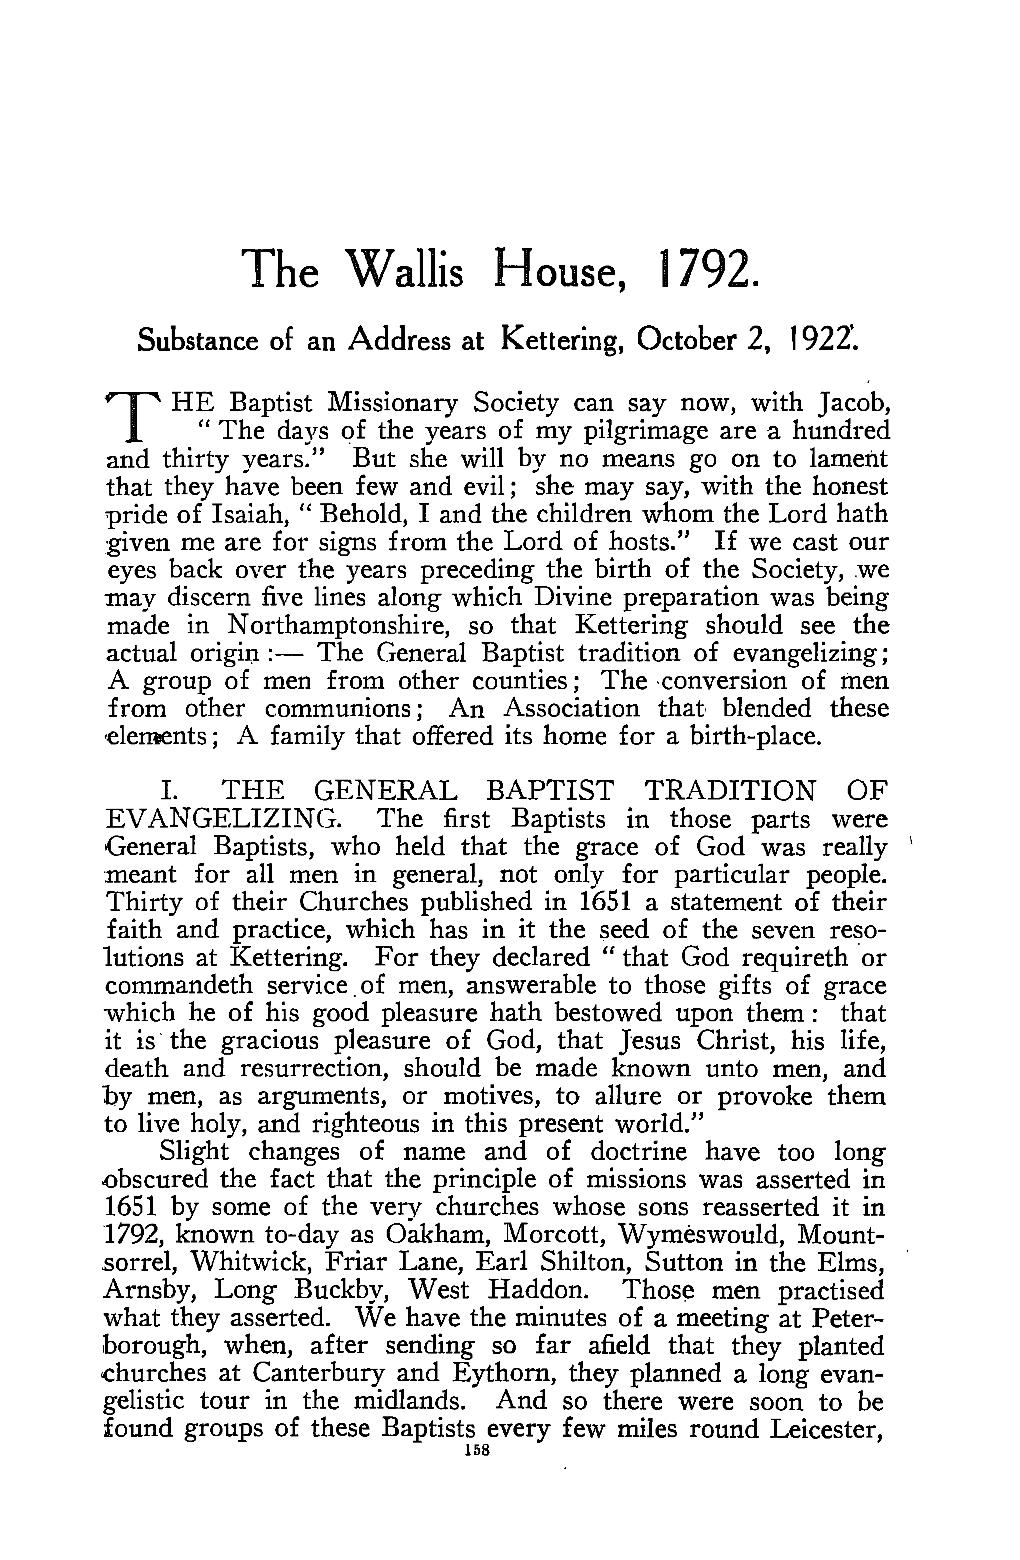 The Wallis House, 1792. Substance of an Address at Kettering, October 2, 1922'